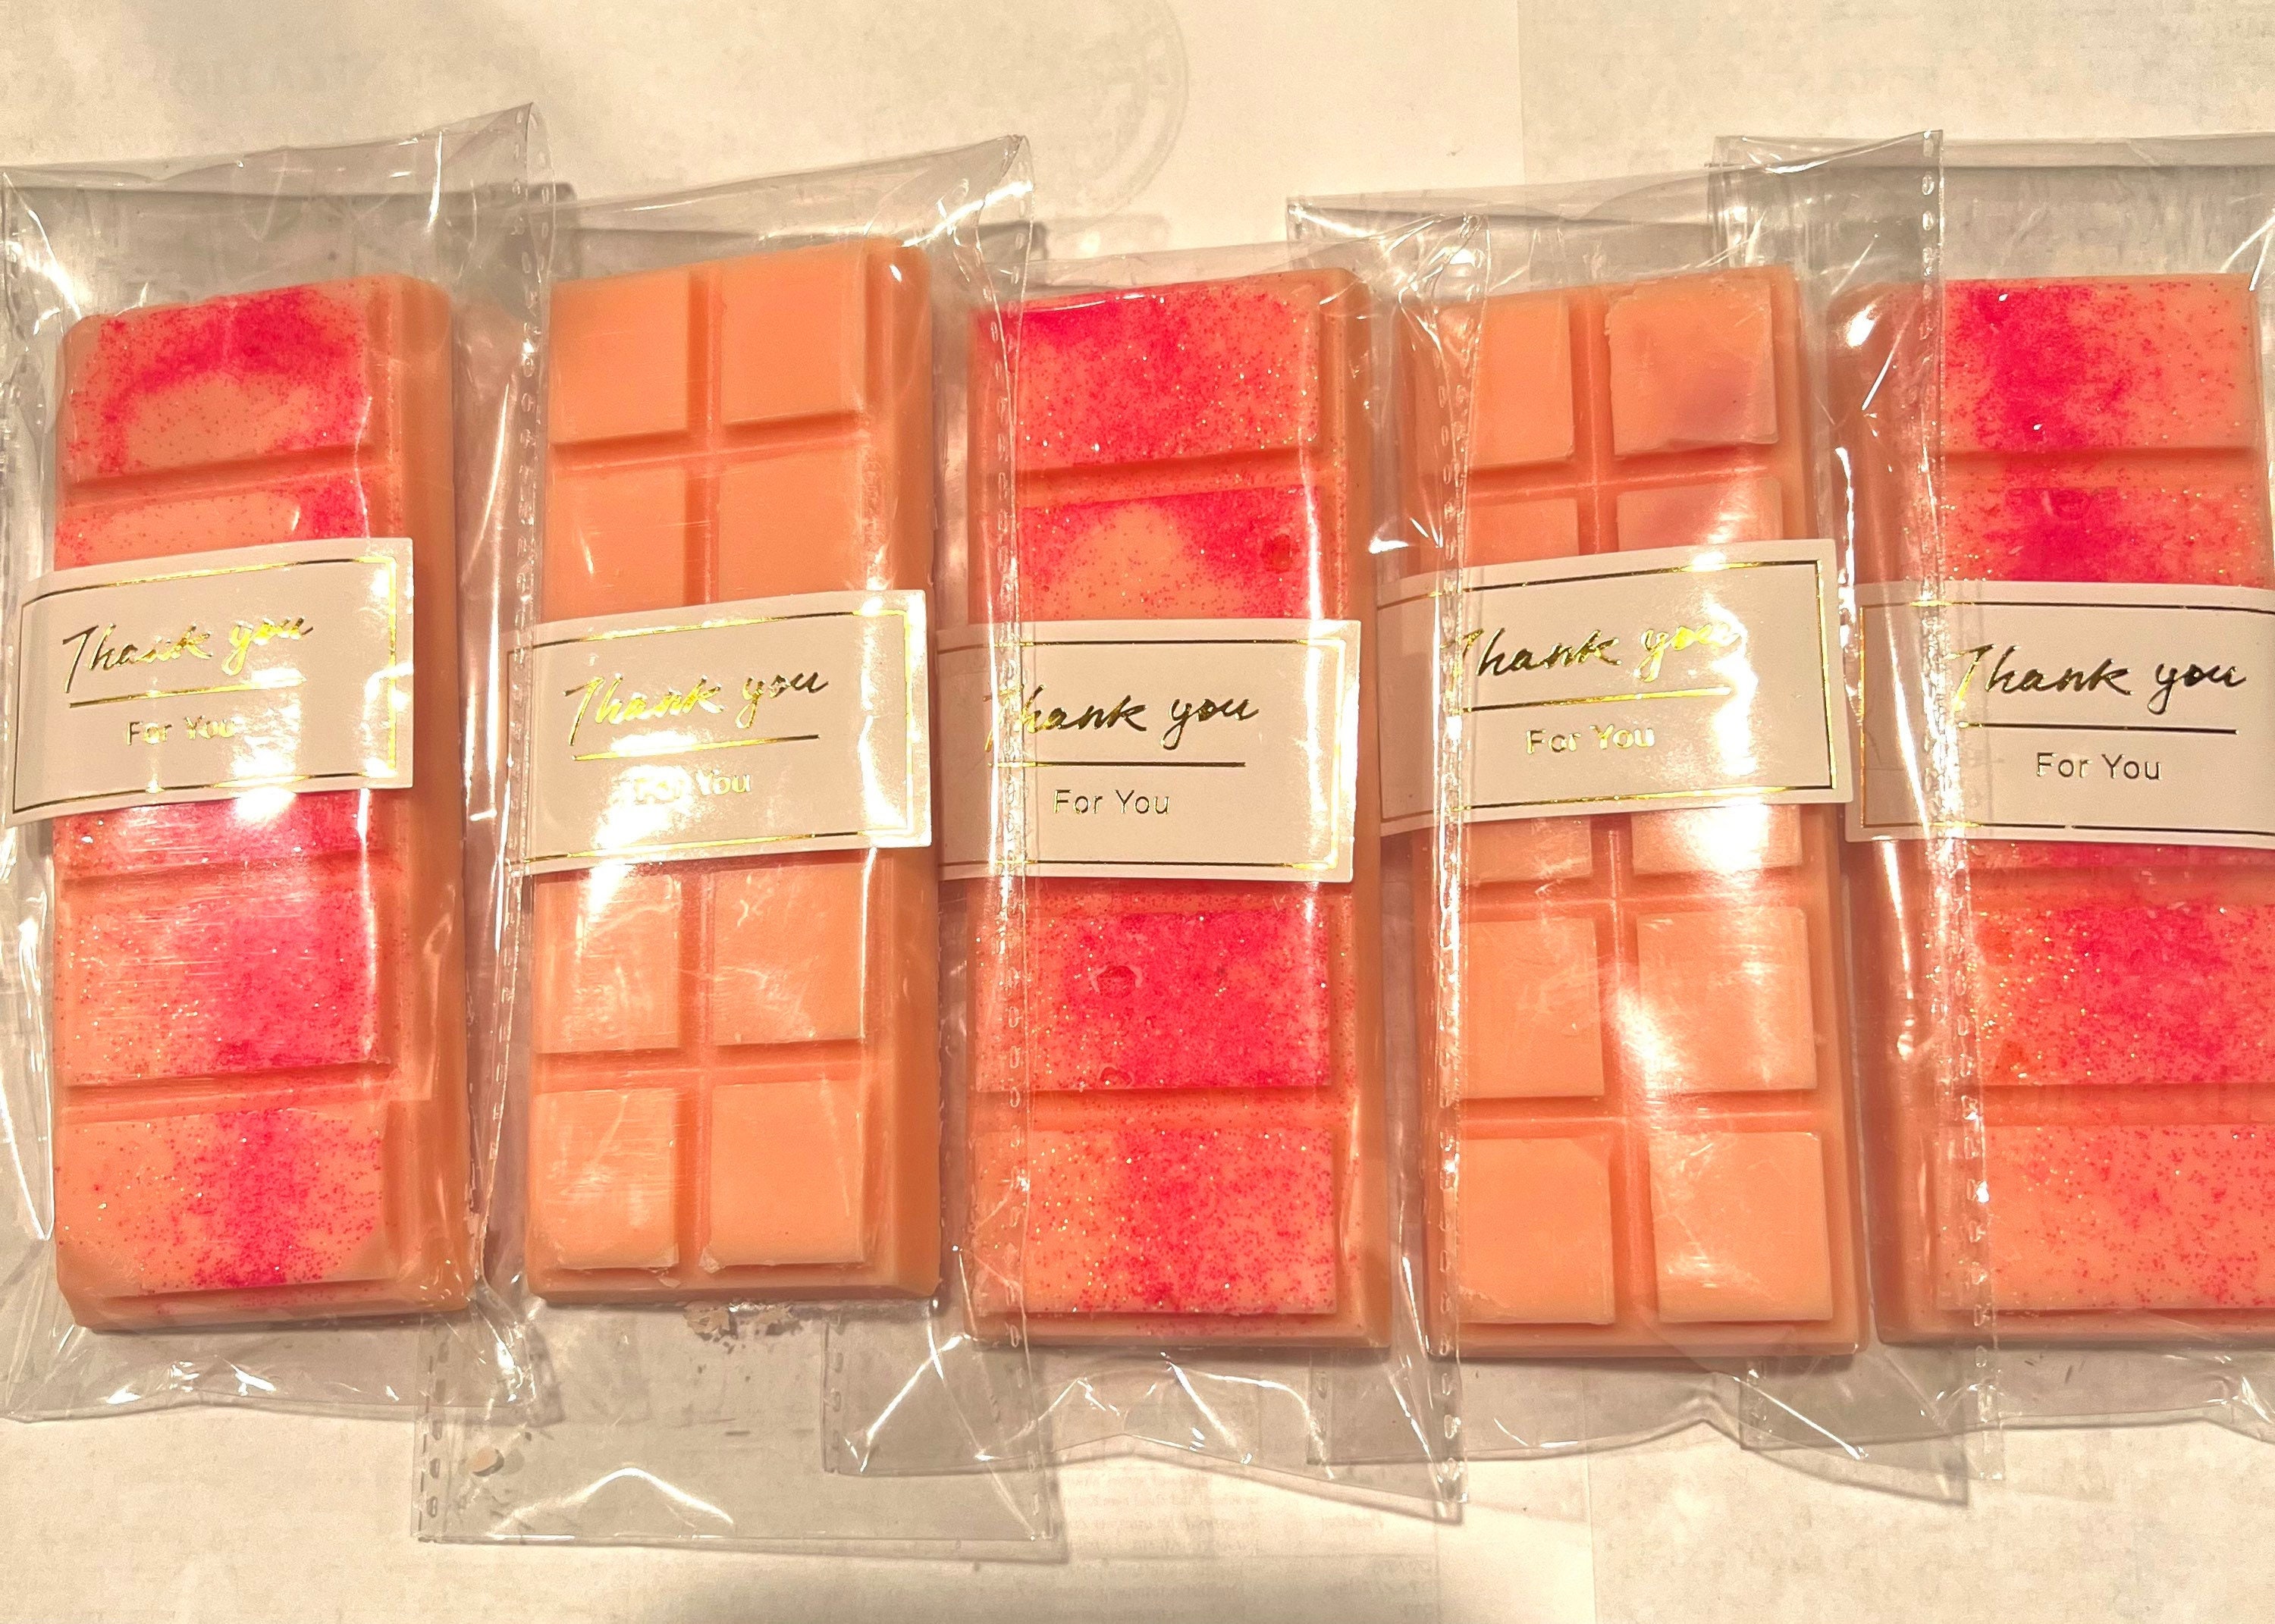 Peach Nectar Hand Crafted Scented Wax Melts